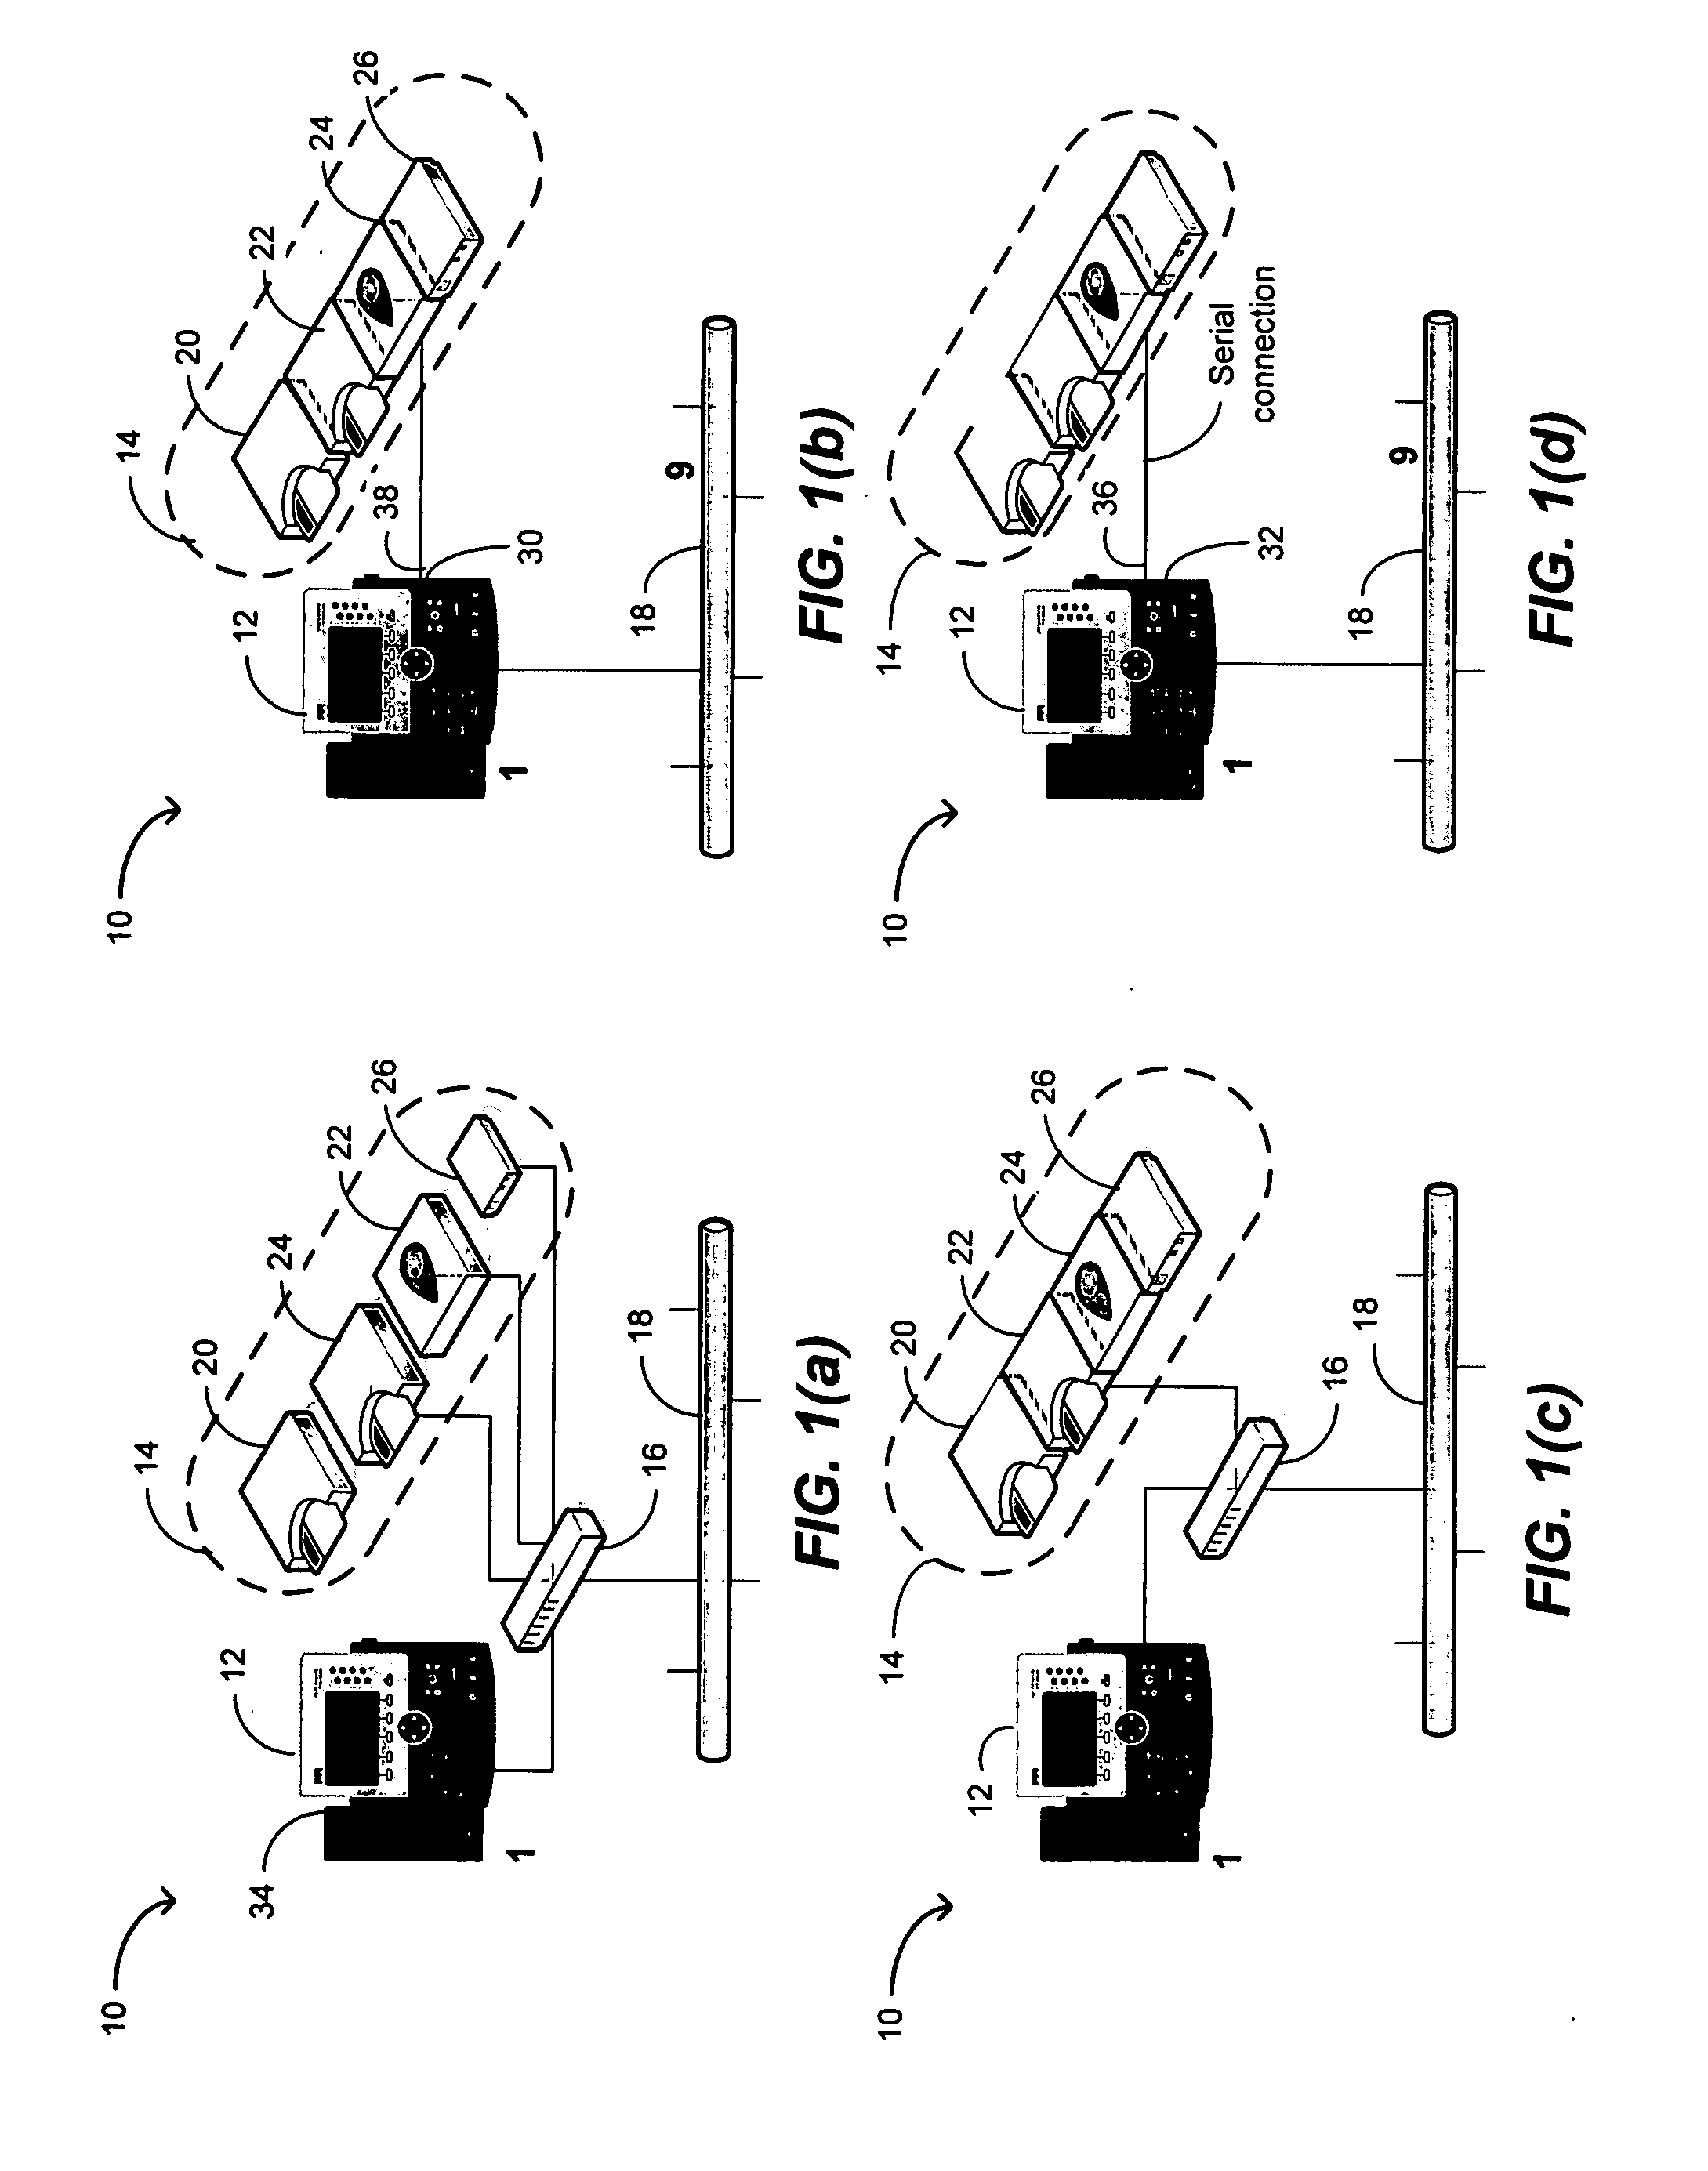 Method and system for multi-level secure personal profile management and access control to the enterprise multi-modal communication environment in heterogeneous convergent communication networks